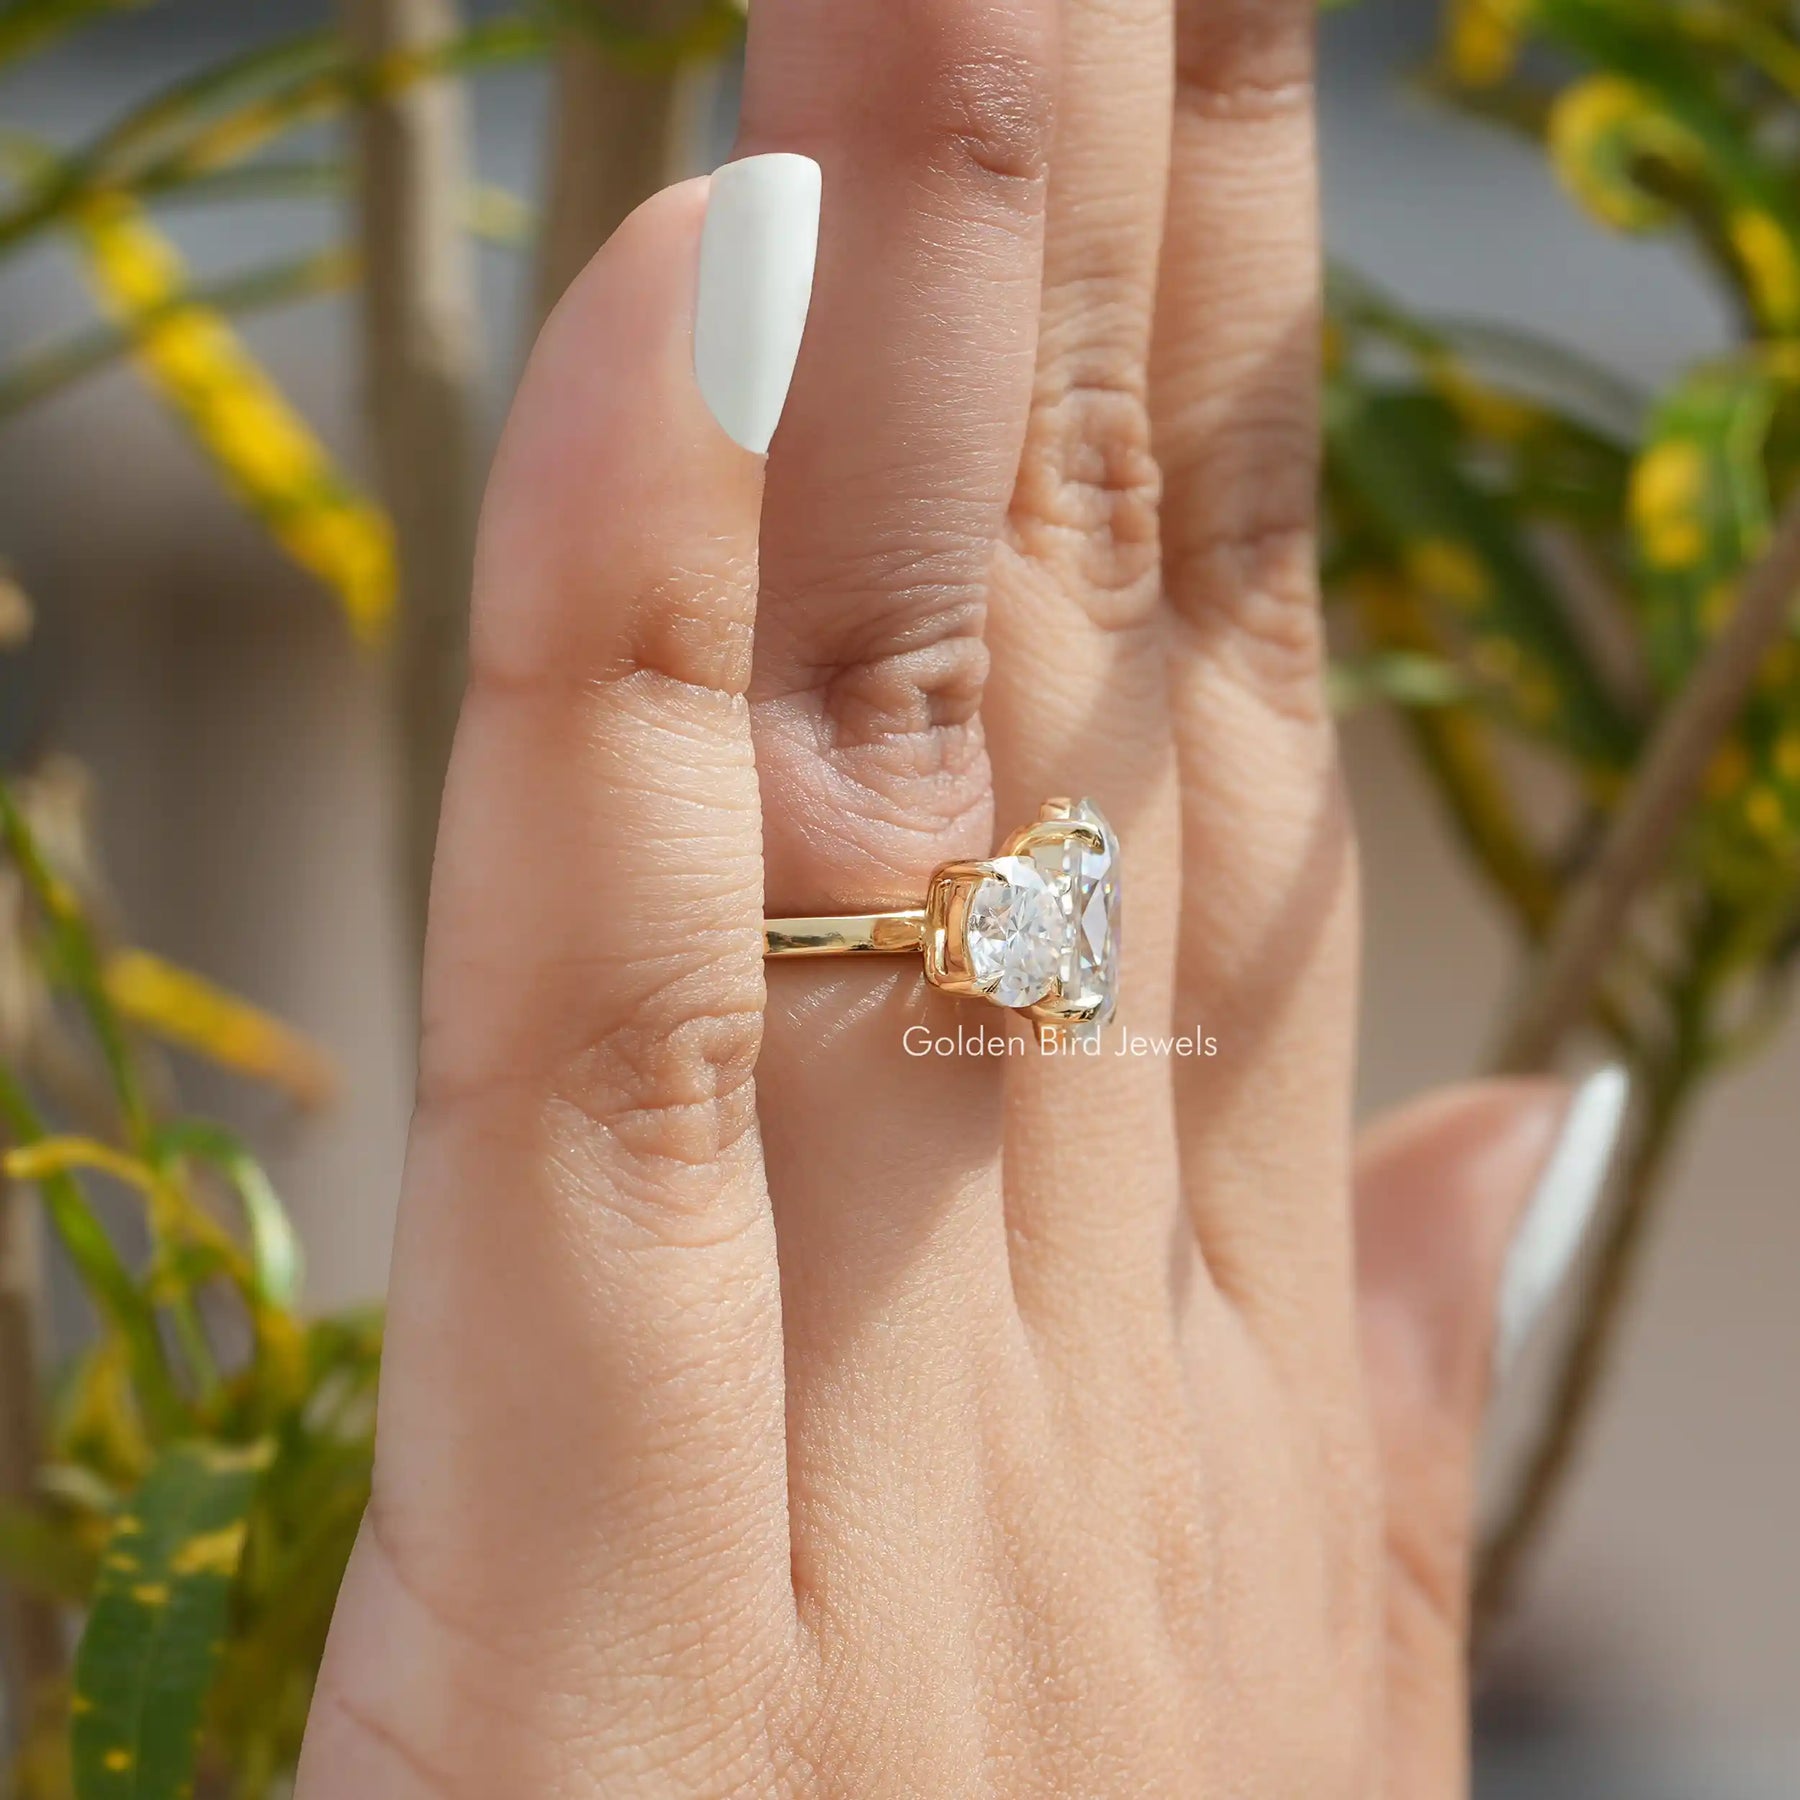 [In finger side view of round and oval cut moissanite ring]-[Golden Bird Jewels]